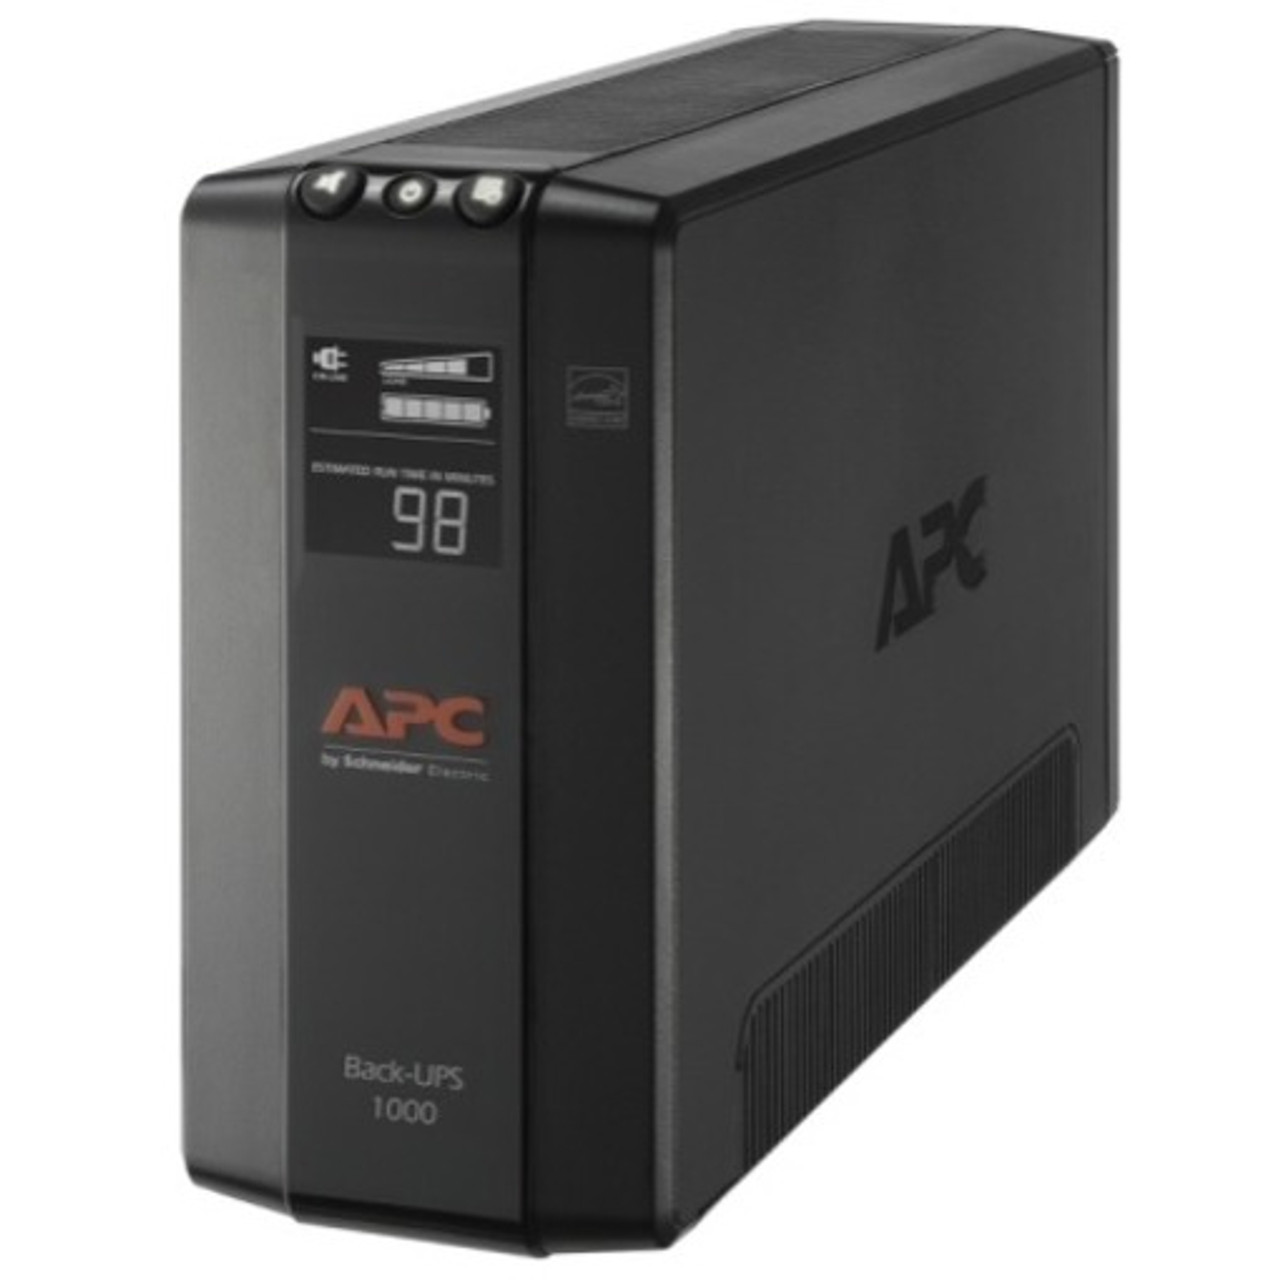 APC by Schneider Electric Back-UPS Pro BX1000M-LM60 1KVA Tower UPS